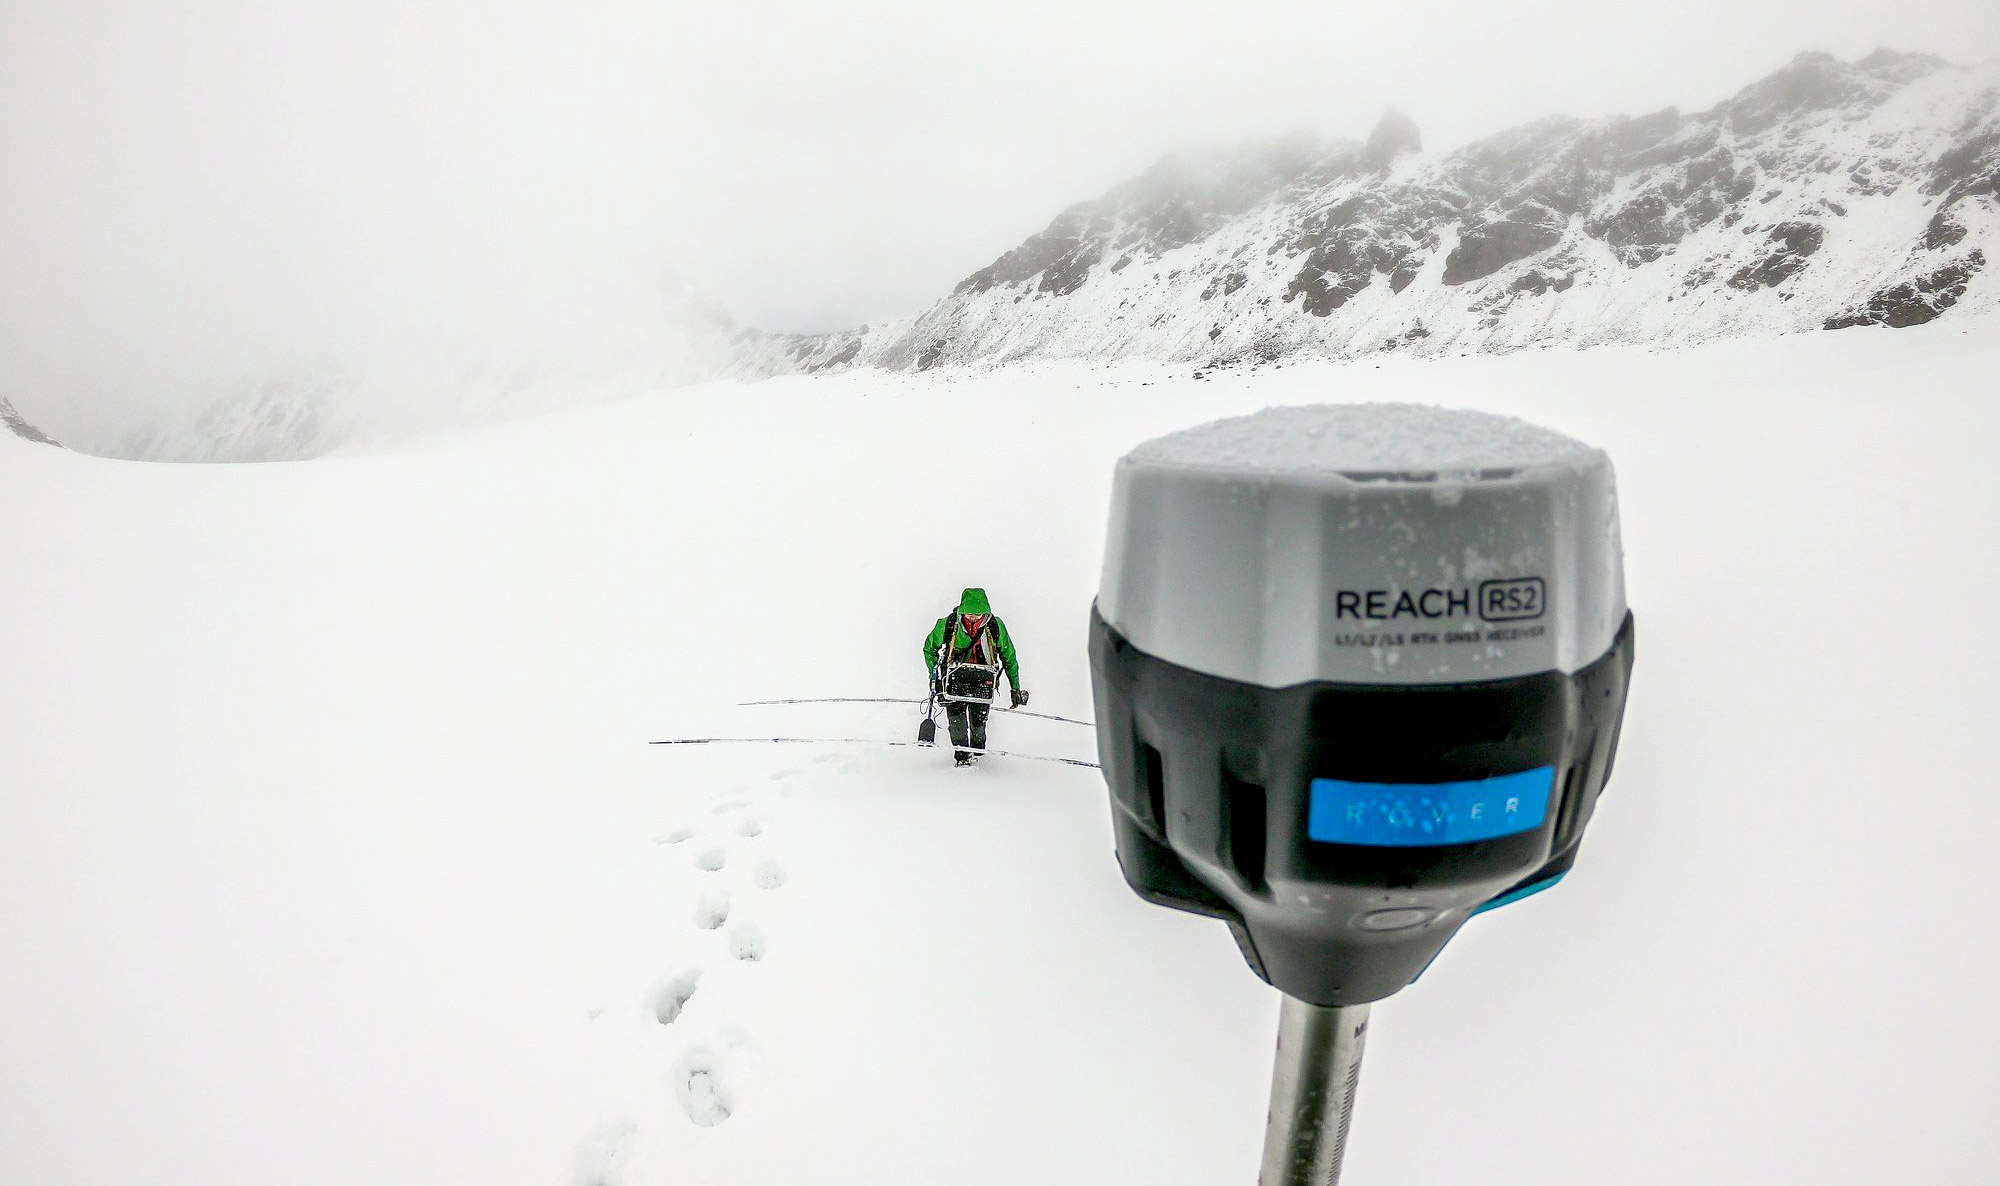 Reach is designed for harsh conditions